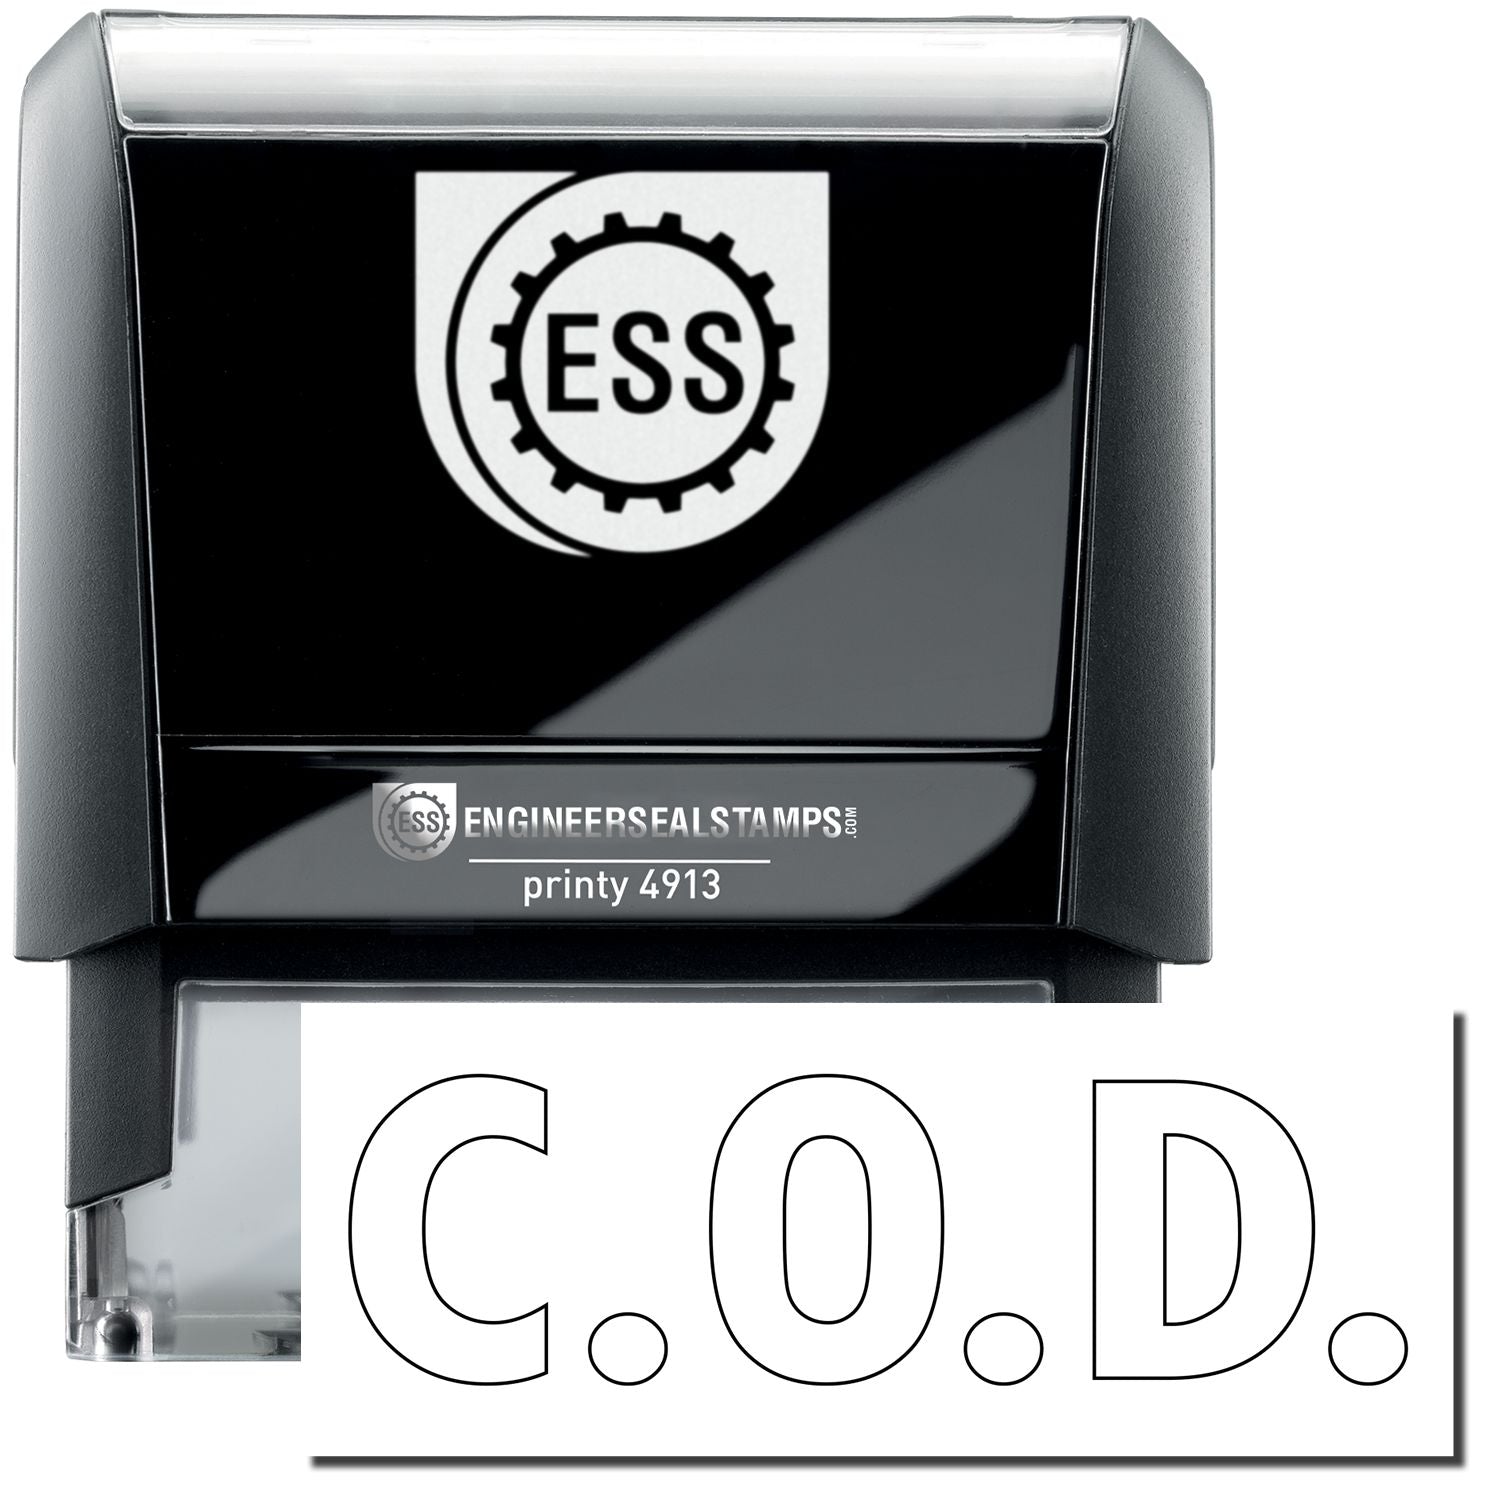 A large self-inking stamp with a stamped image showing how the text "C.O.D." in a large outline font is displayed by it.